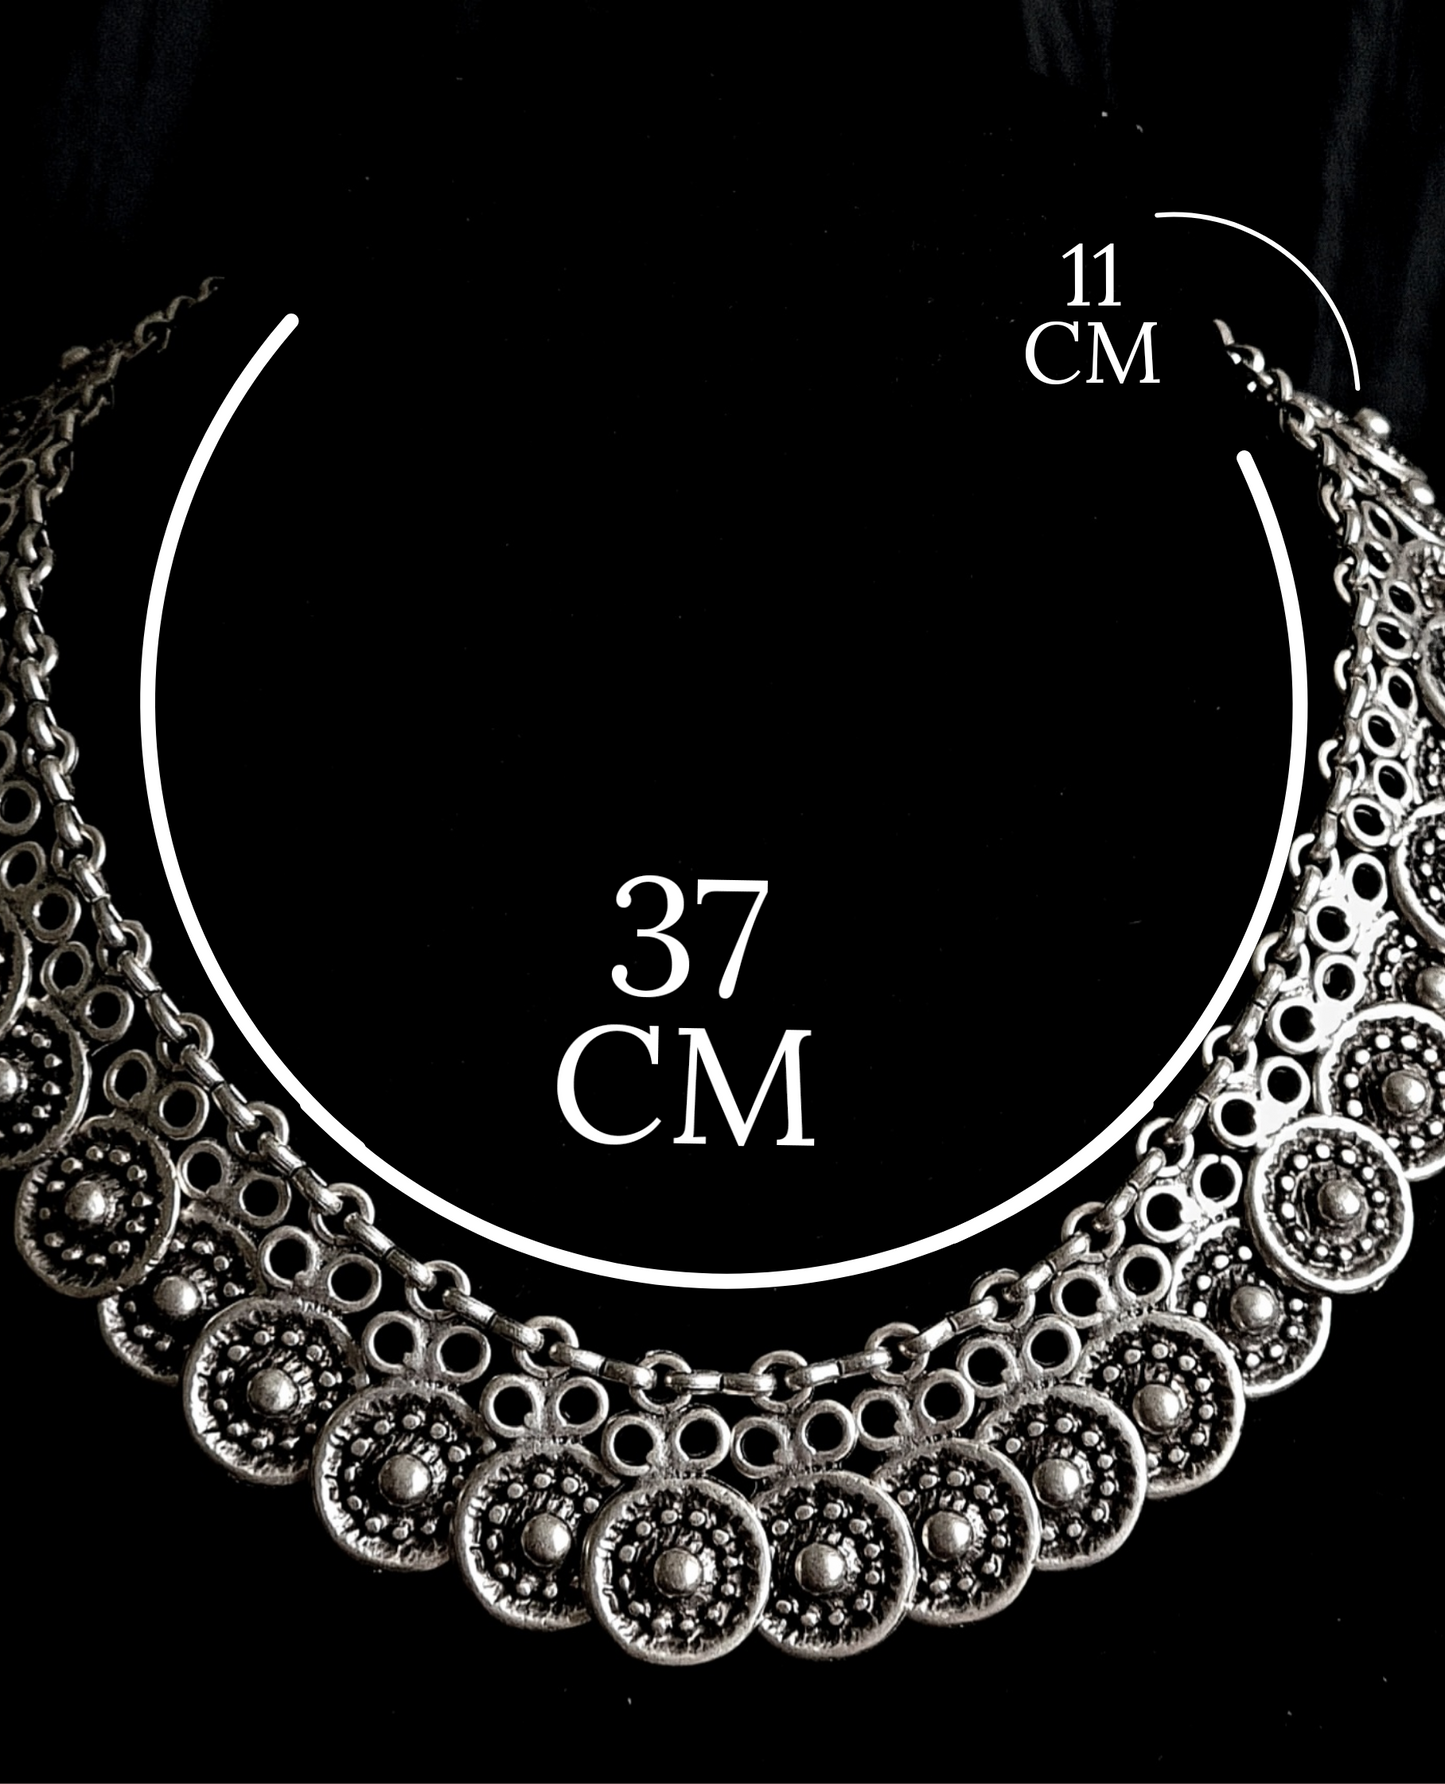 Enya Necklace showcasing its intricate filigree design and sparkling accents.